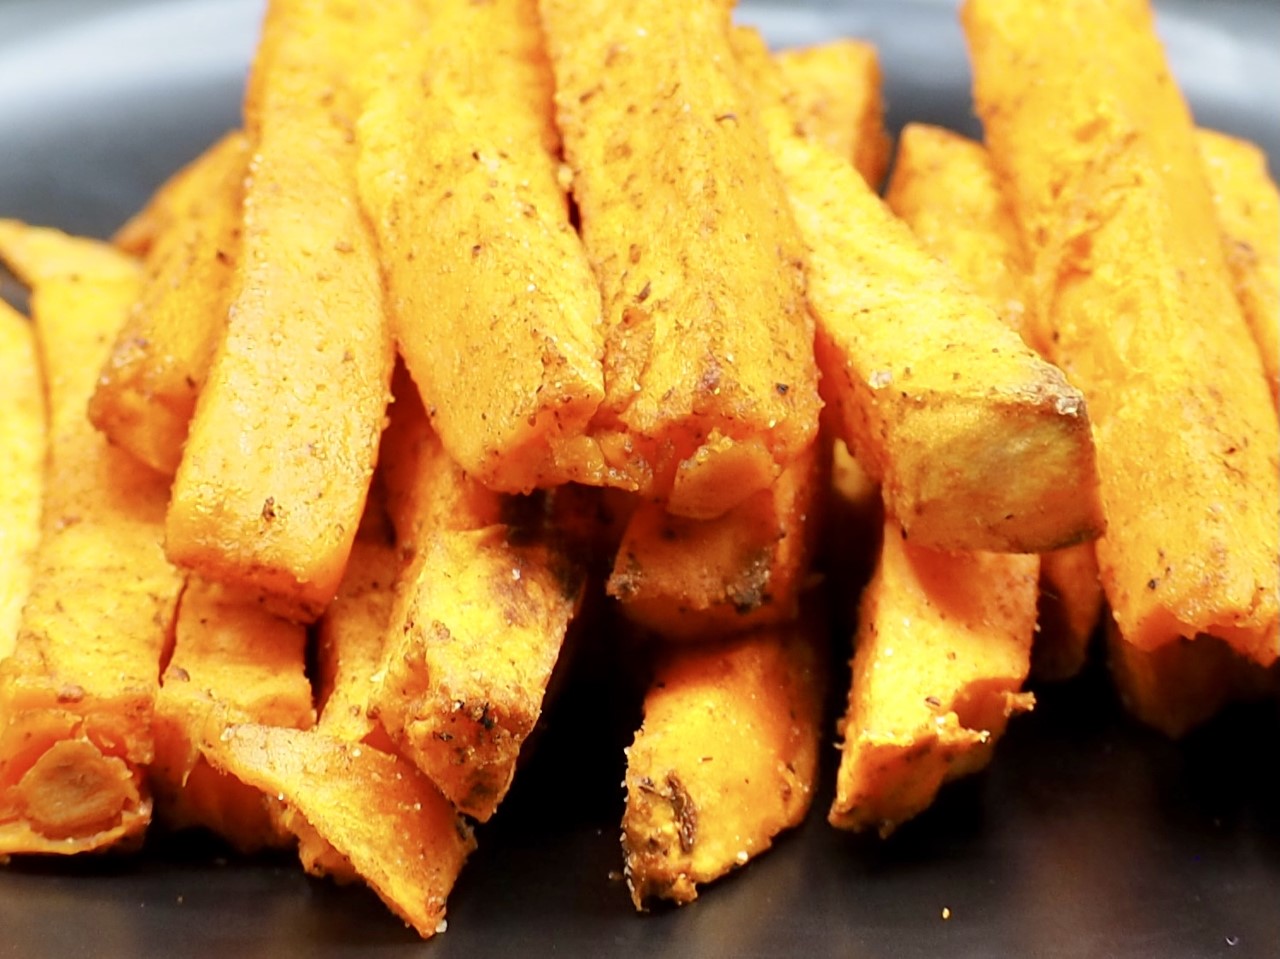 Oven-Baked Sweet Potato Fries from Scratch with Paprika